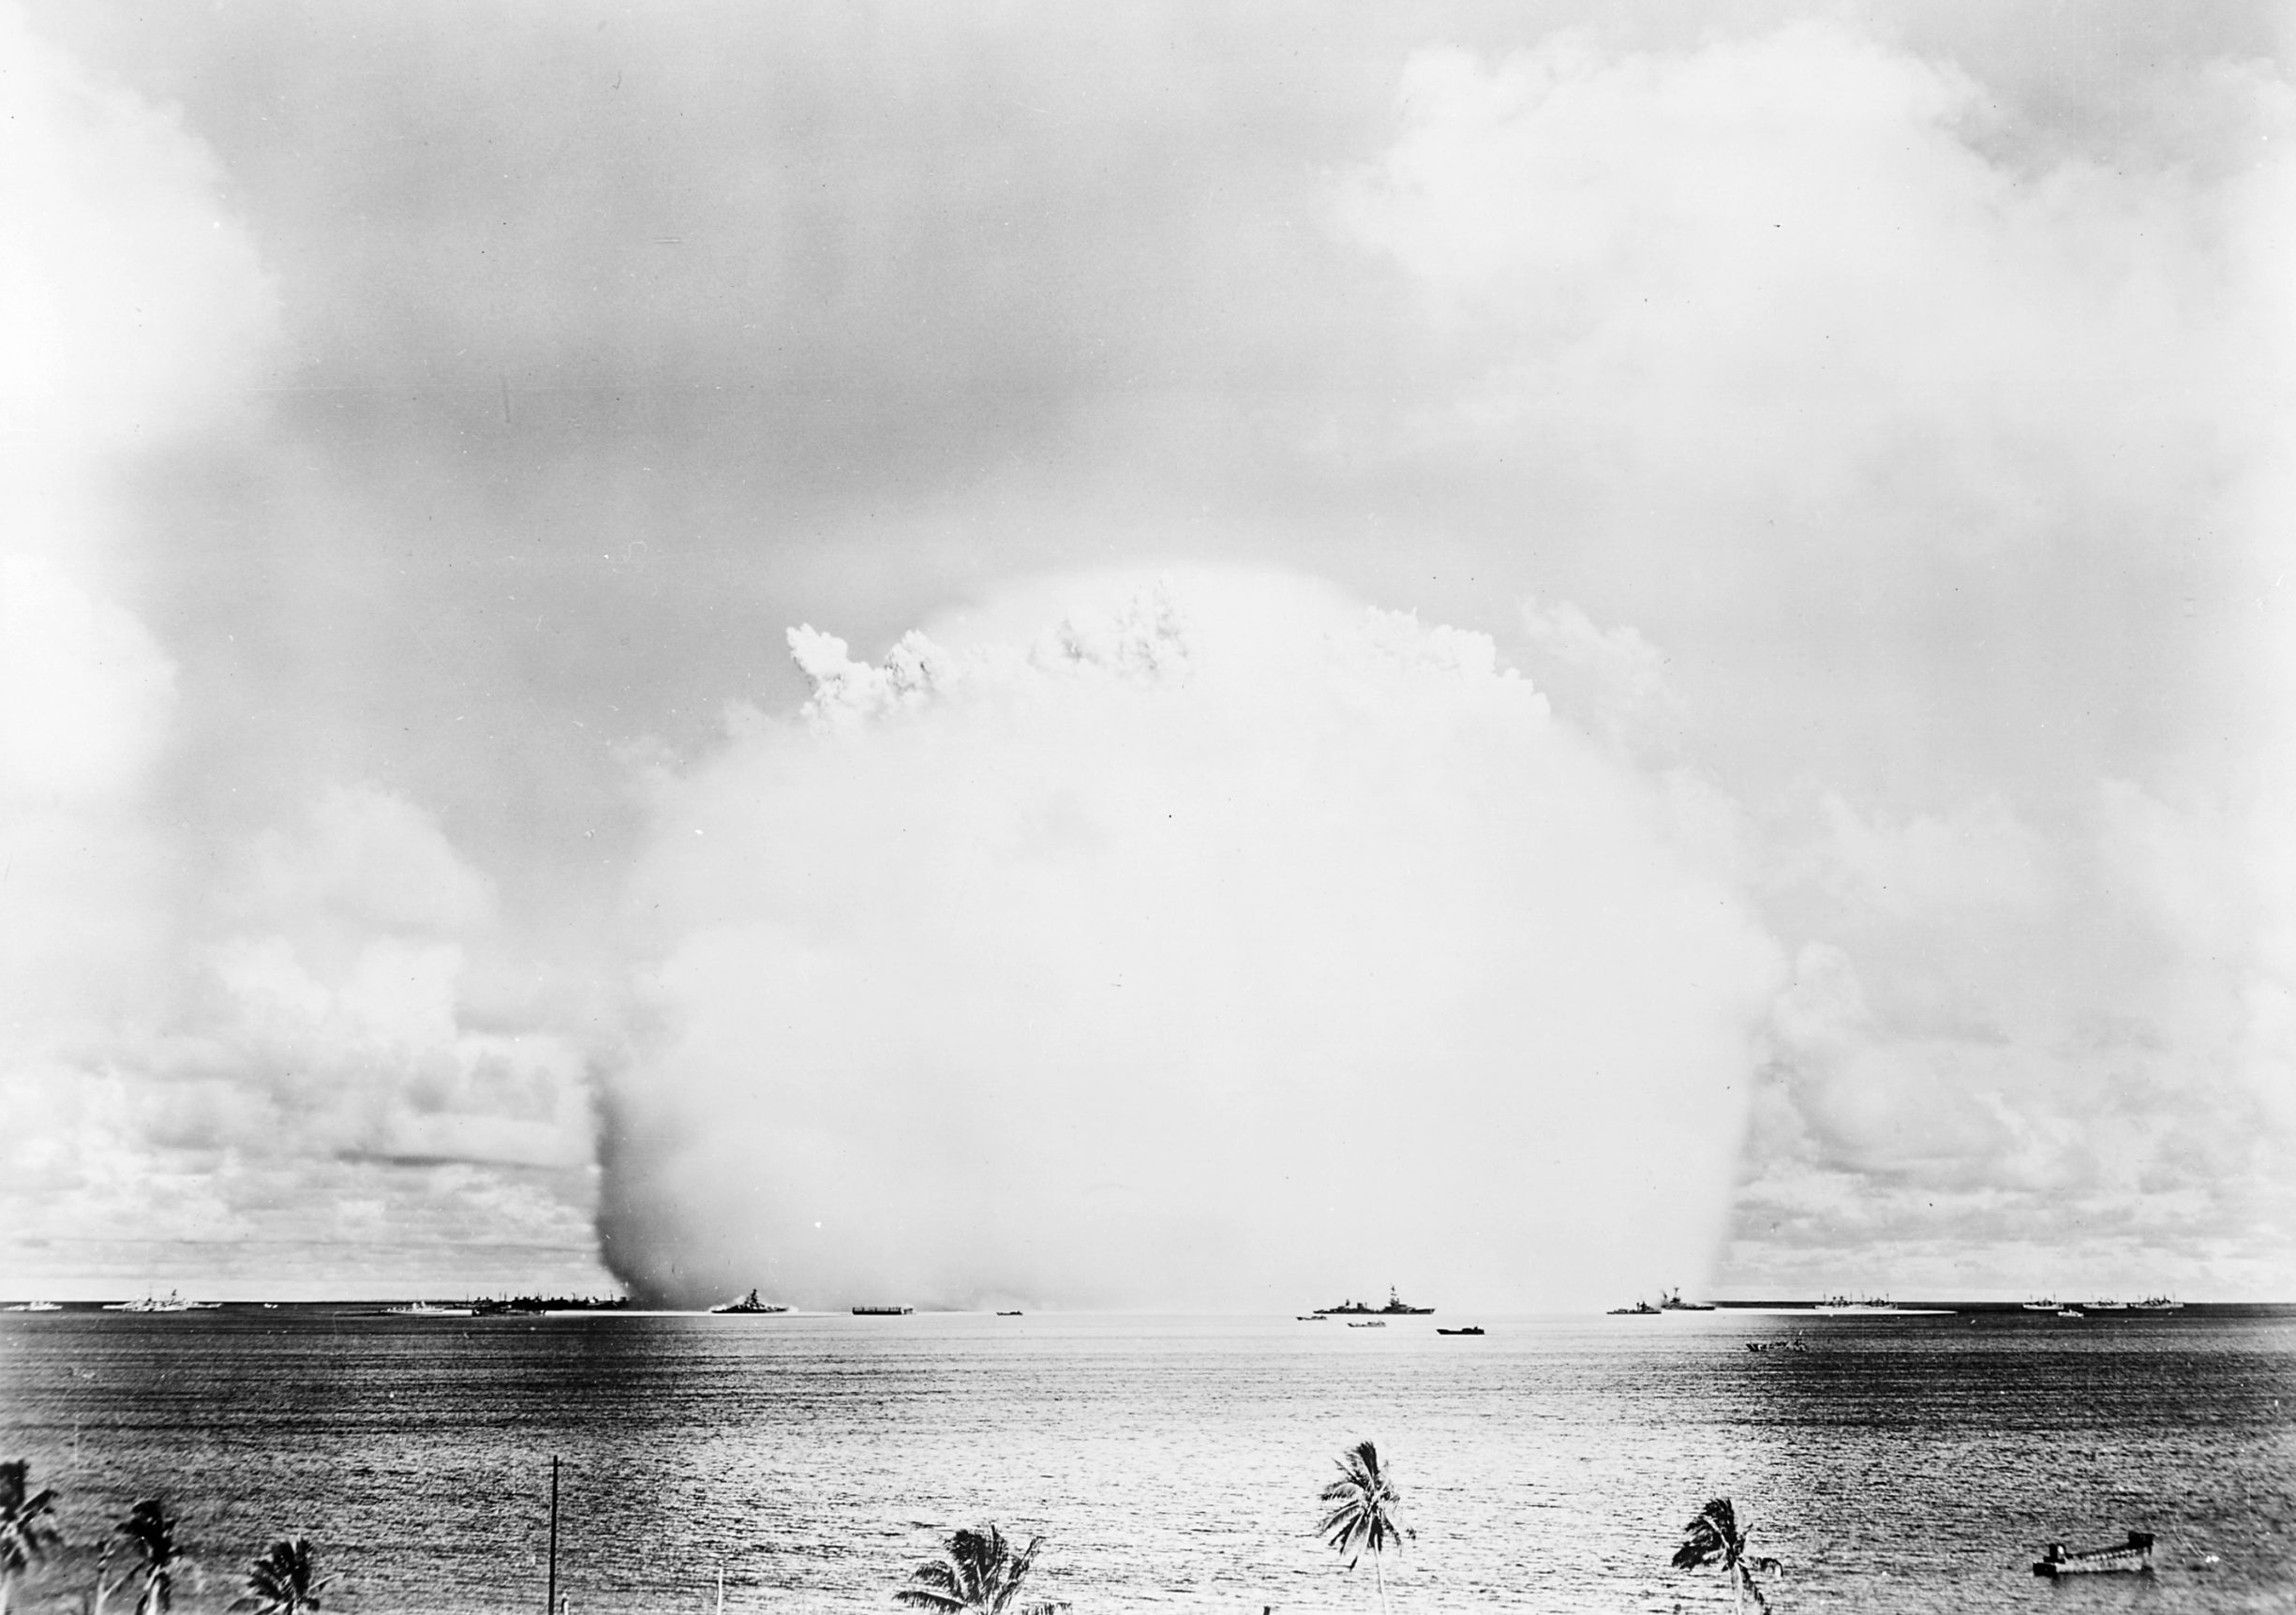 The atomic cloud during the "Baker" nuclear test at the Bikini atoll. 25 July 1946. Photo: U.S. Navy (photo 80-G-396231) Public Domain.